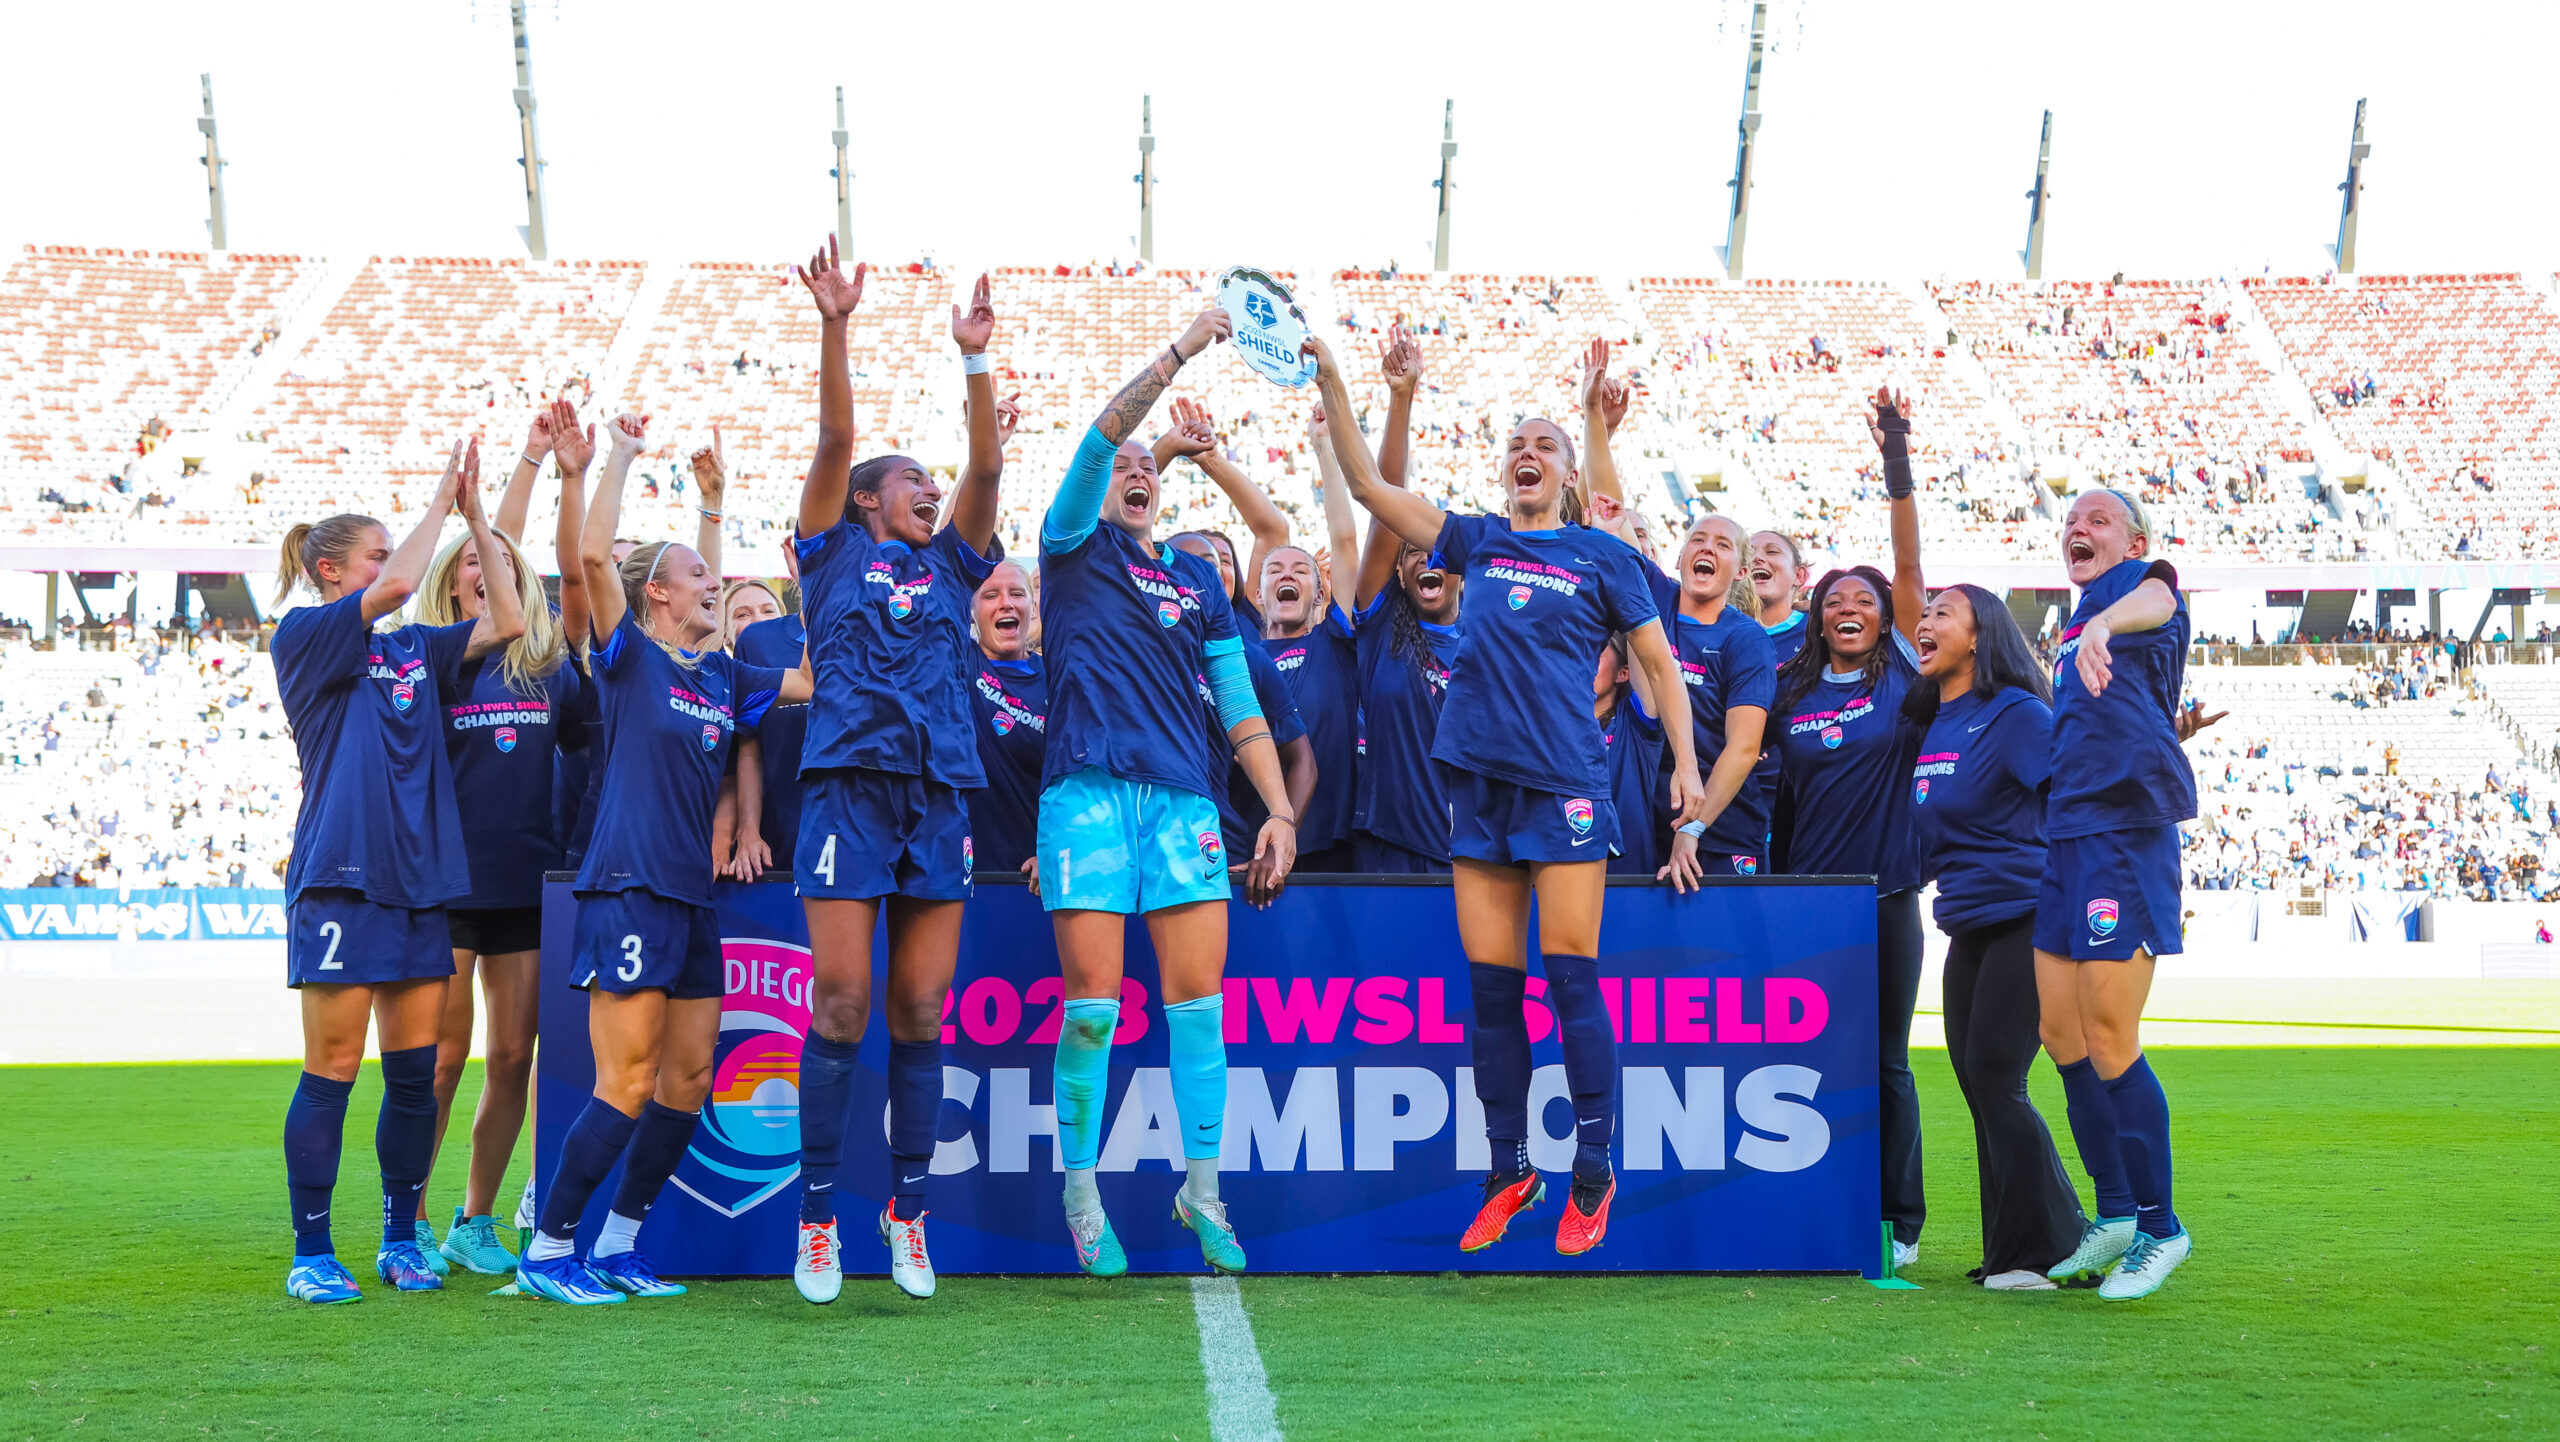 San Diego to host 2023 NWSL Championship at Snapdragon